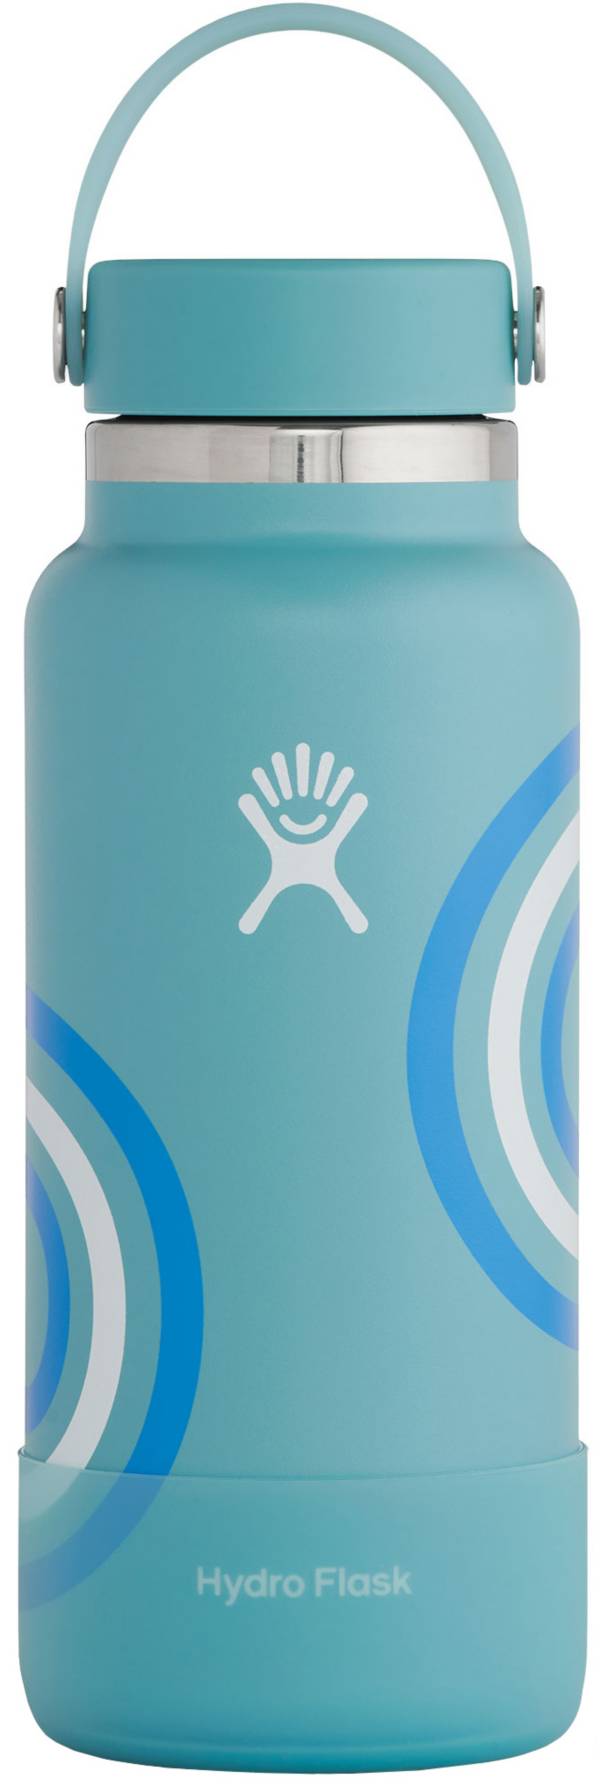 Hydro Flask 32 oz. Refill For Good Wide Mouth Bottle with Flex Cap product image